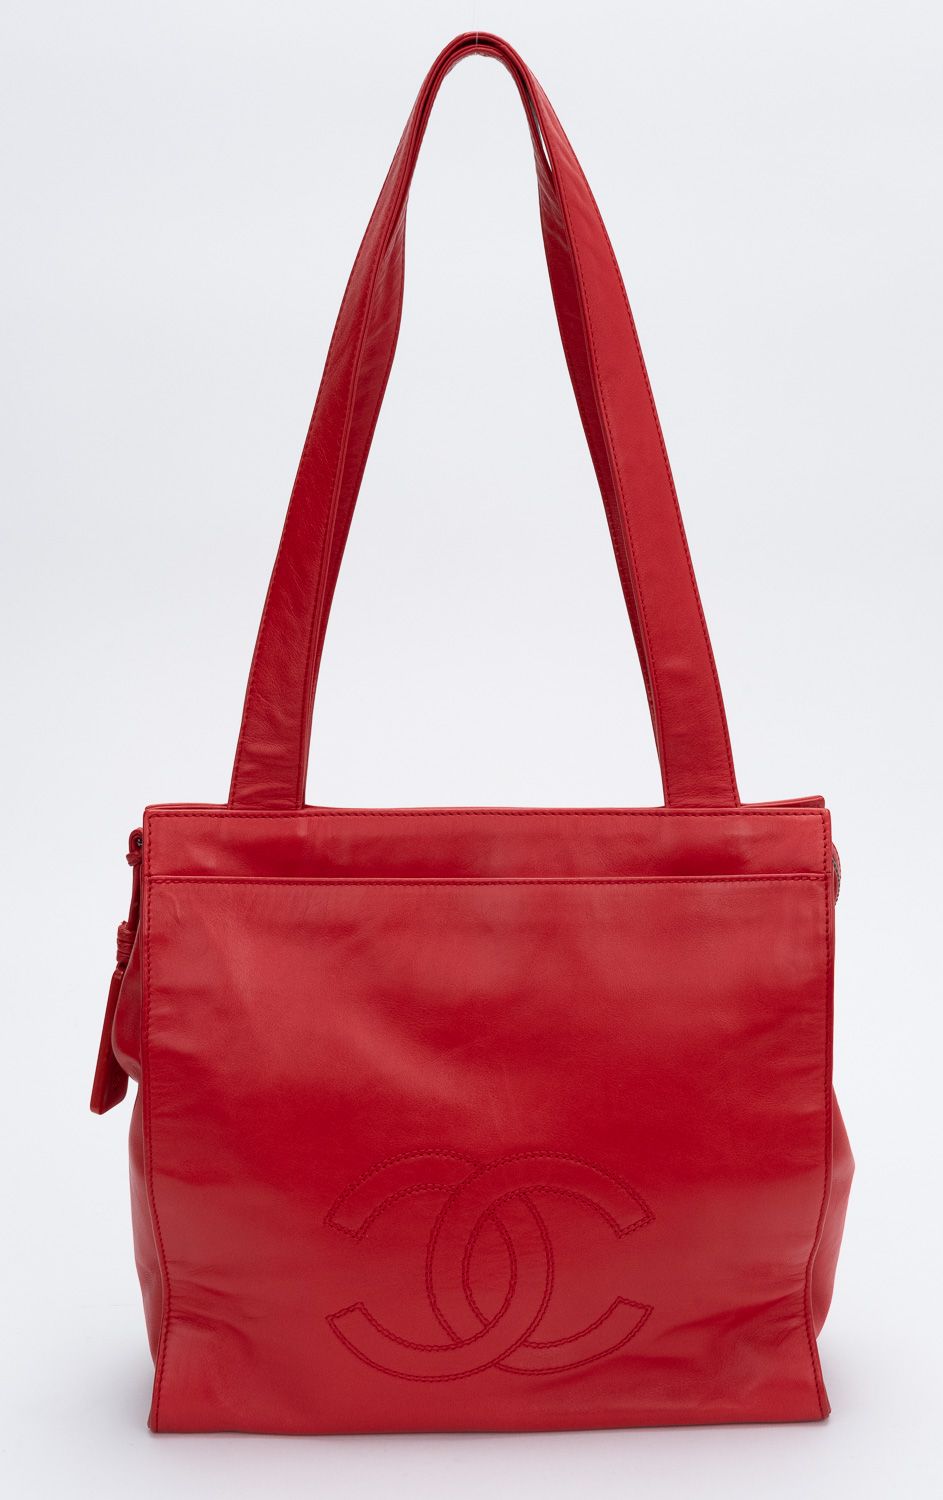 Chanel Vintage Lambskin Tote Bag Red~P77666540